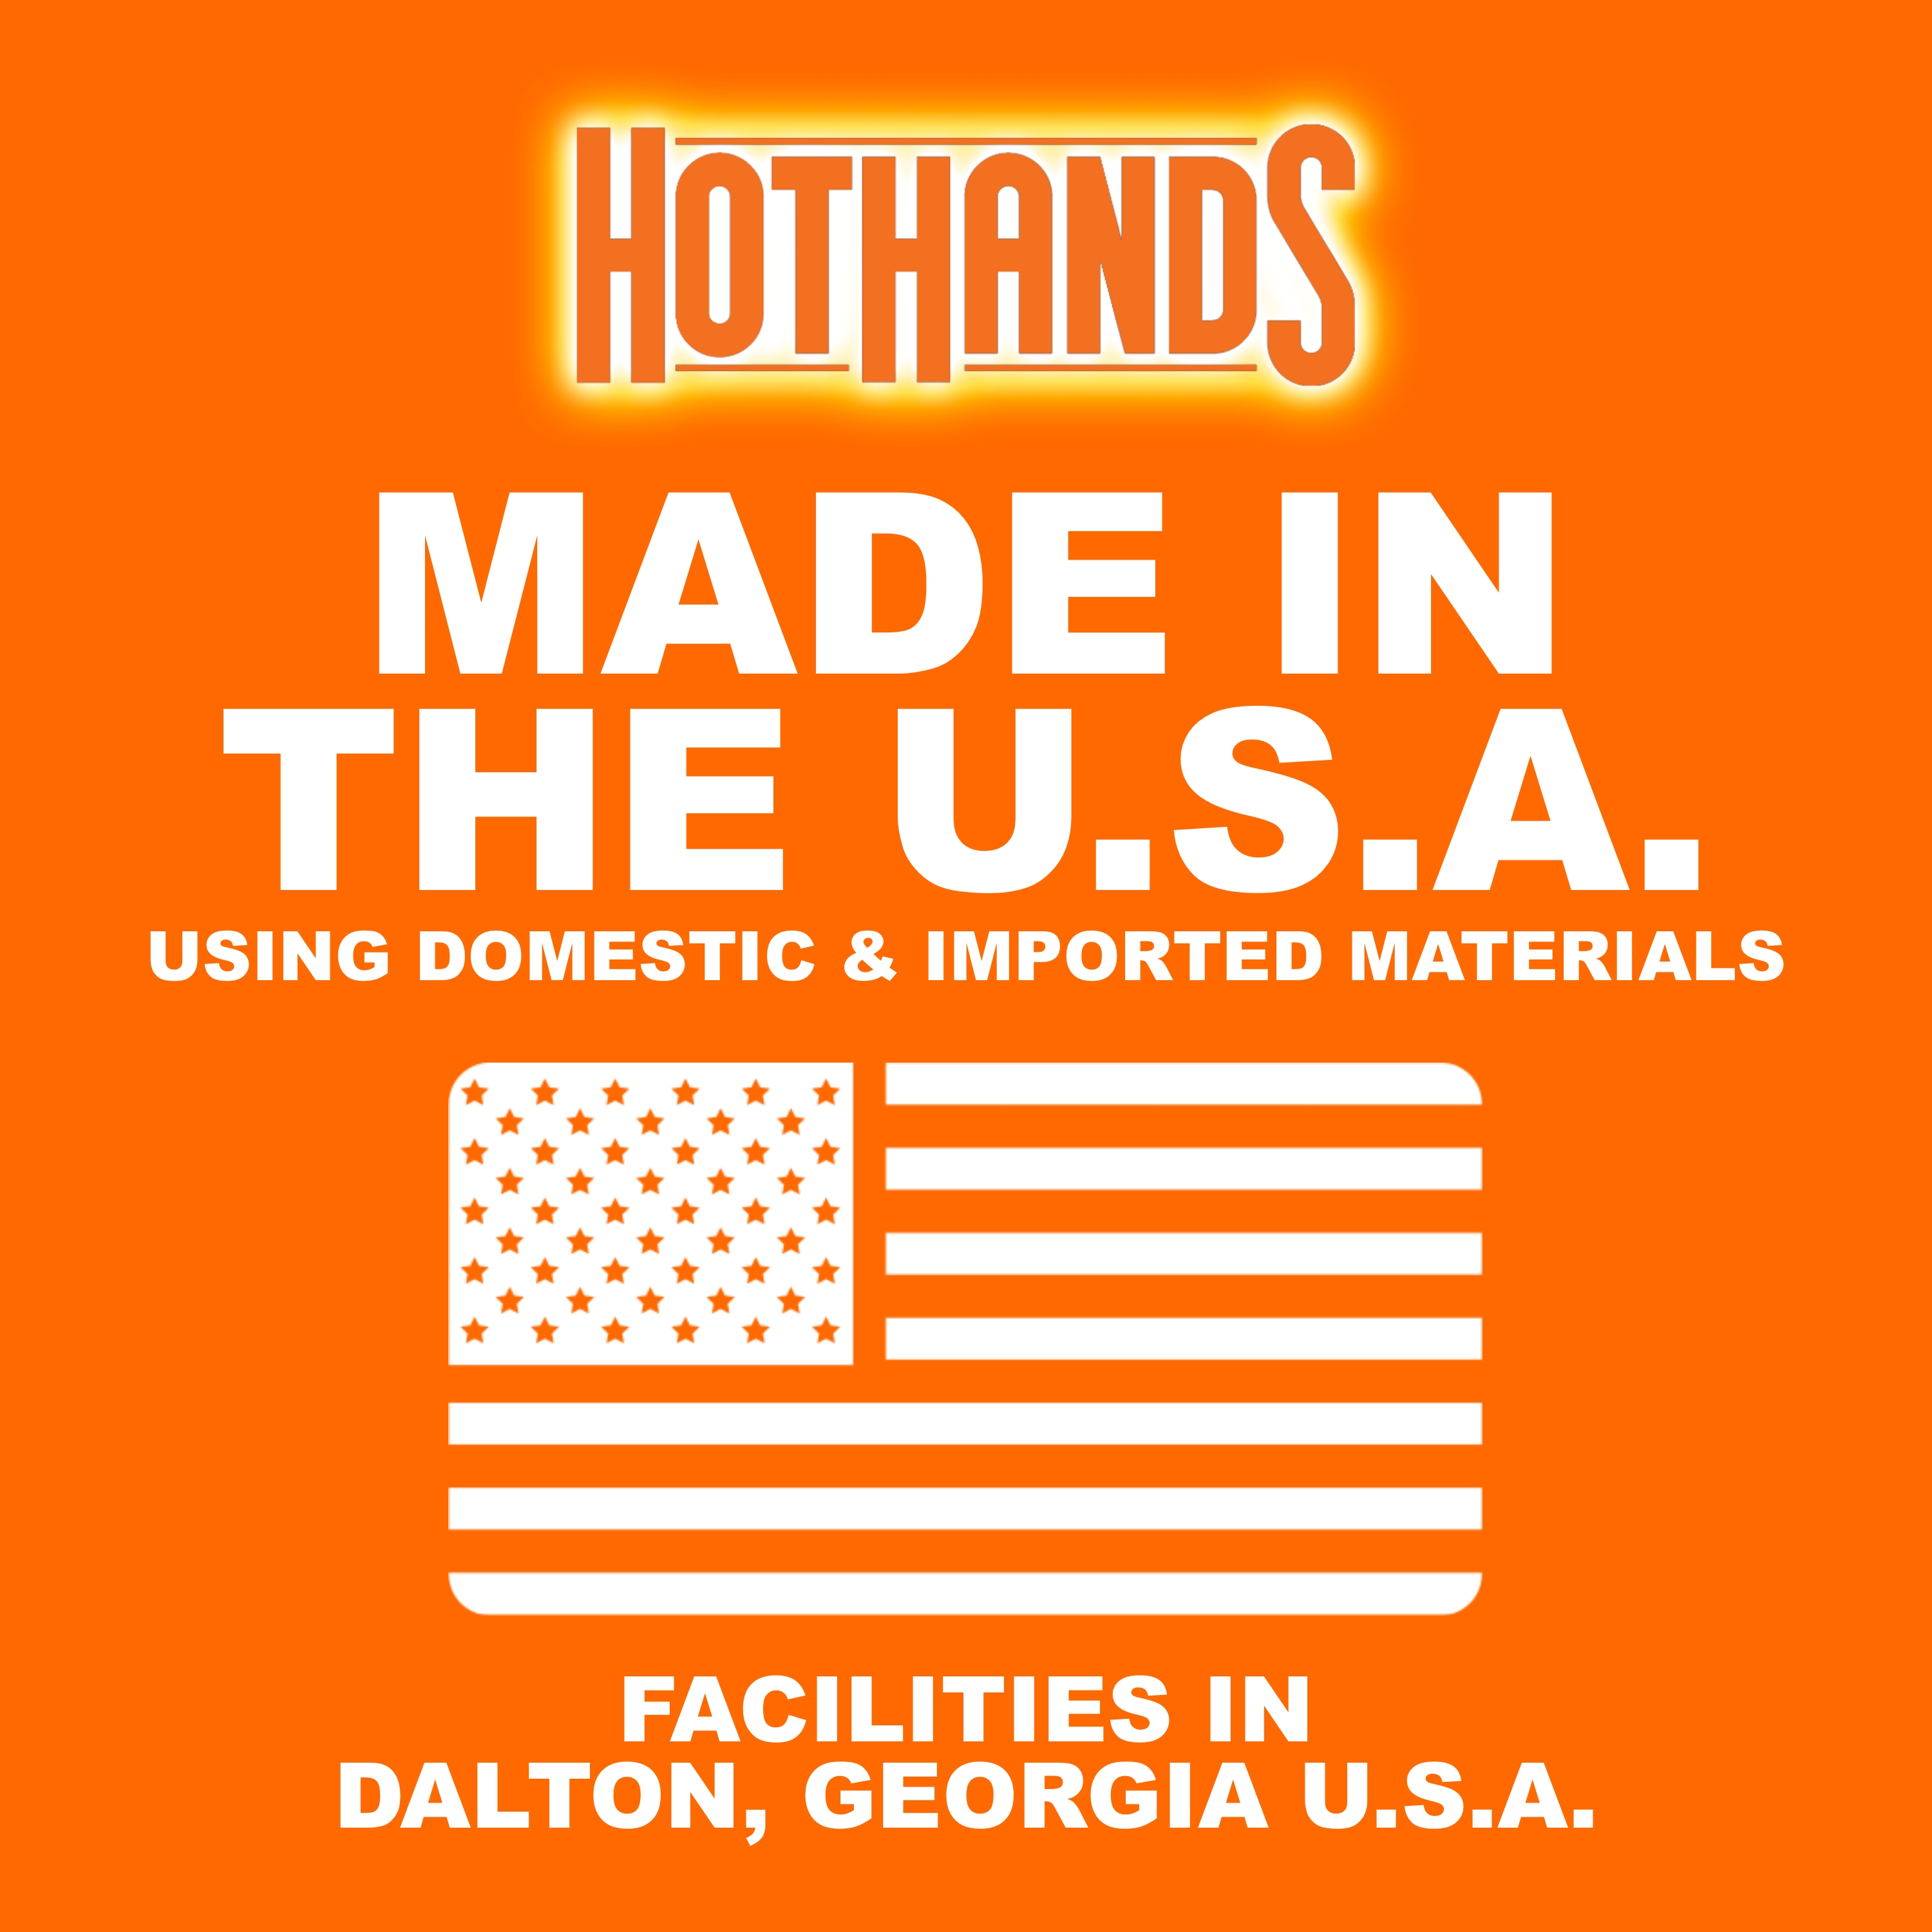 HotHands Hand Warmer 10-Pair Value Pack - image 4 of 6